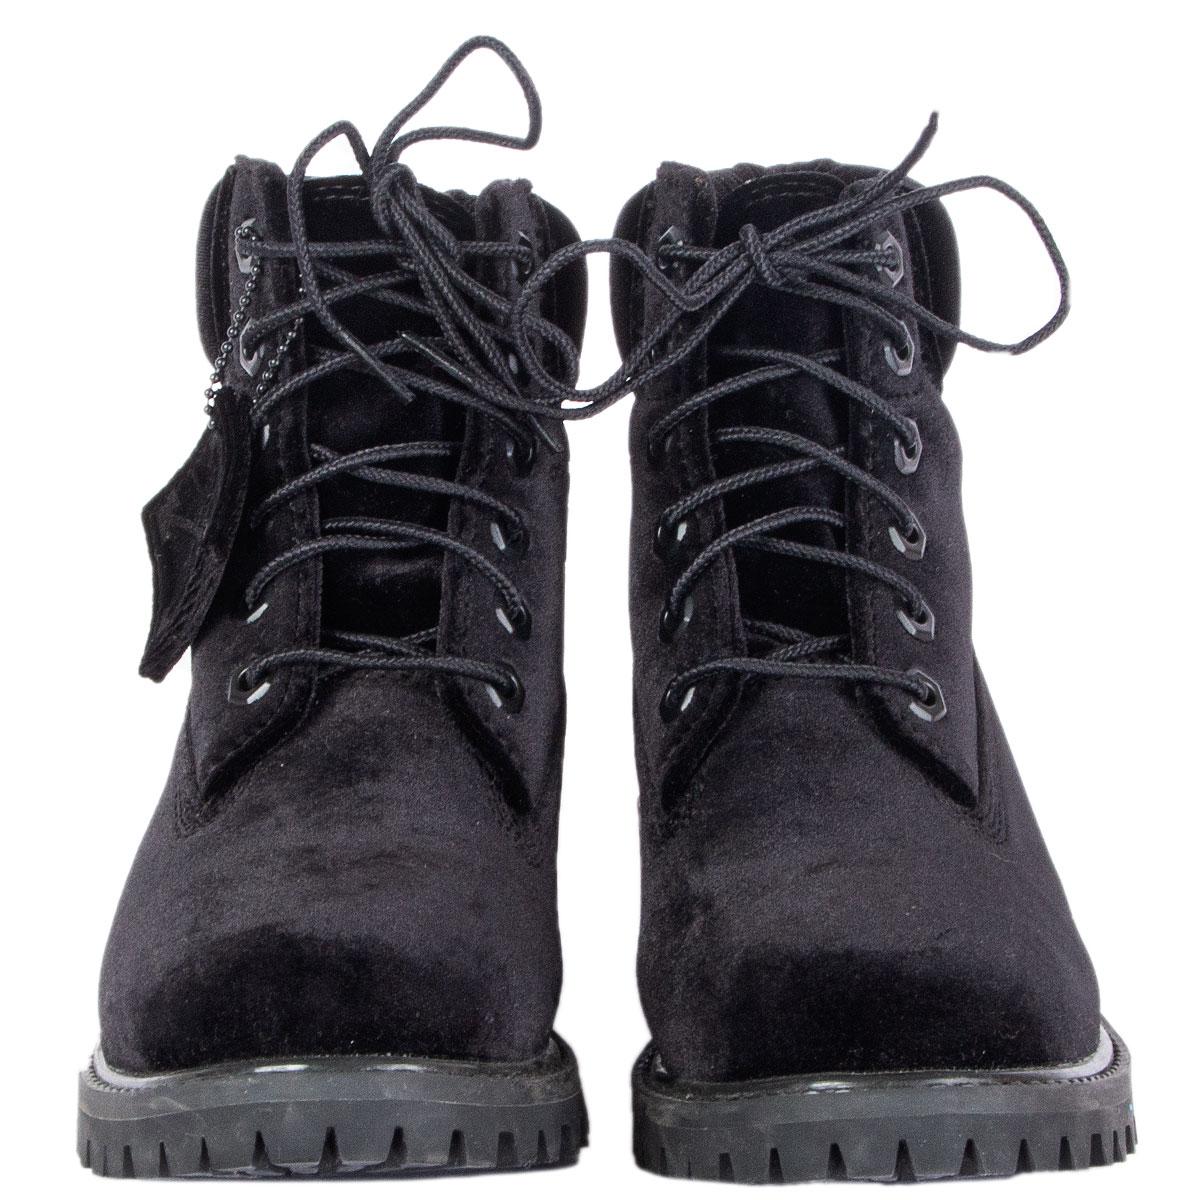 100% authentic Off-White X Timberland boots in back velvet. They feature a round toe, lace-up closure, a padded collar, a black logo plaque at outer side, a logo embossed at the inner side, a leather footbed, a tonal treaded rubber Vibram sole,